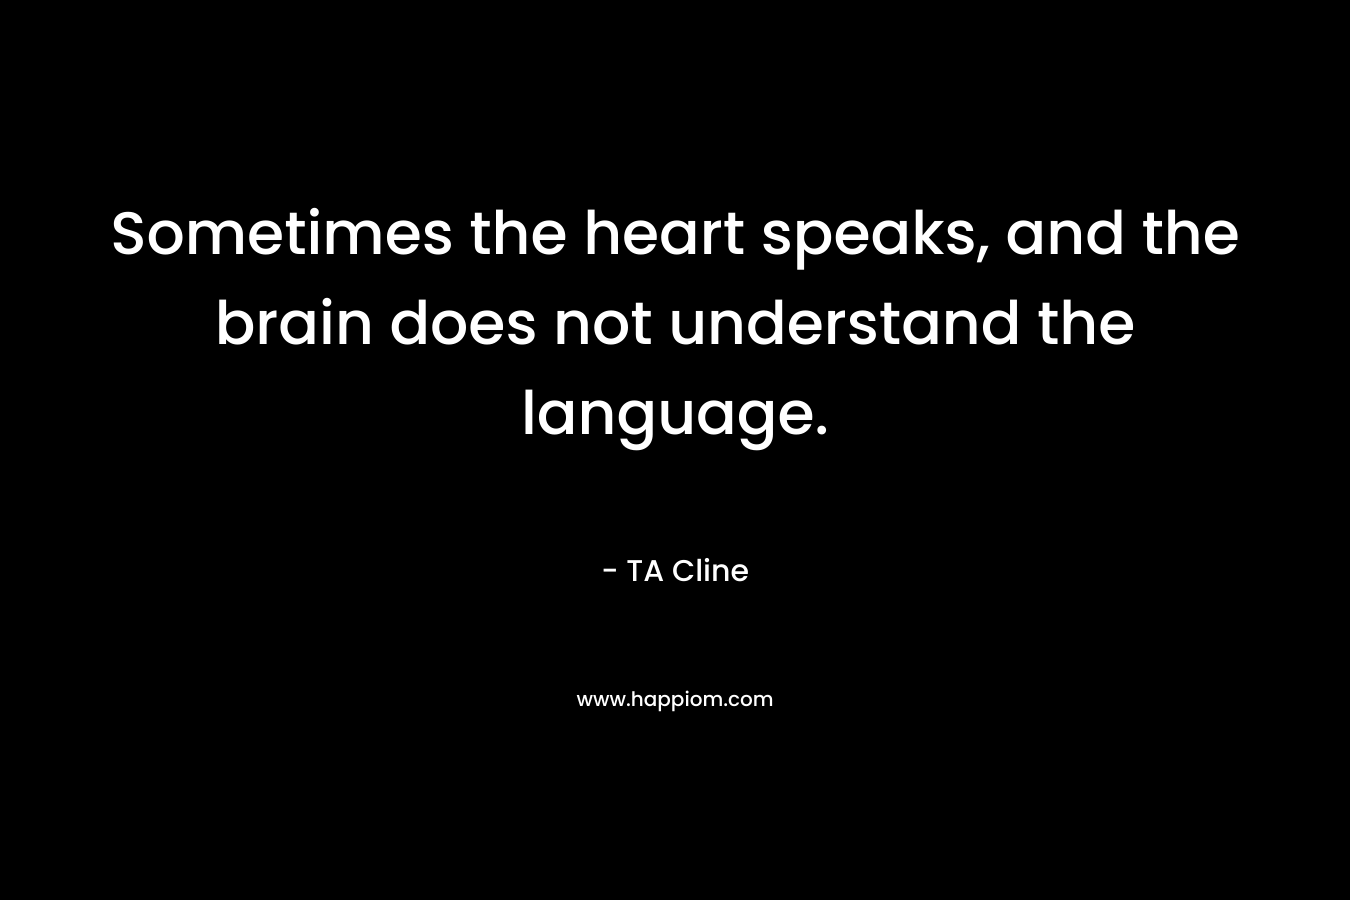 Sometimes the heart speaks, and the brain does not understand the language.